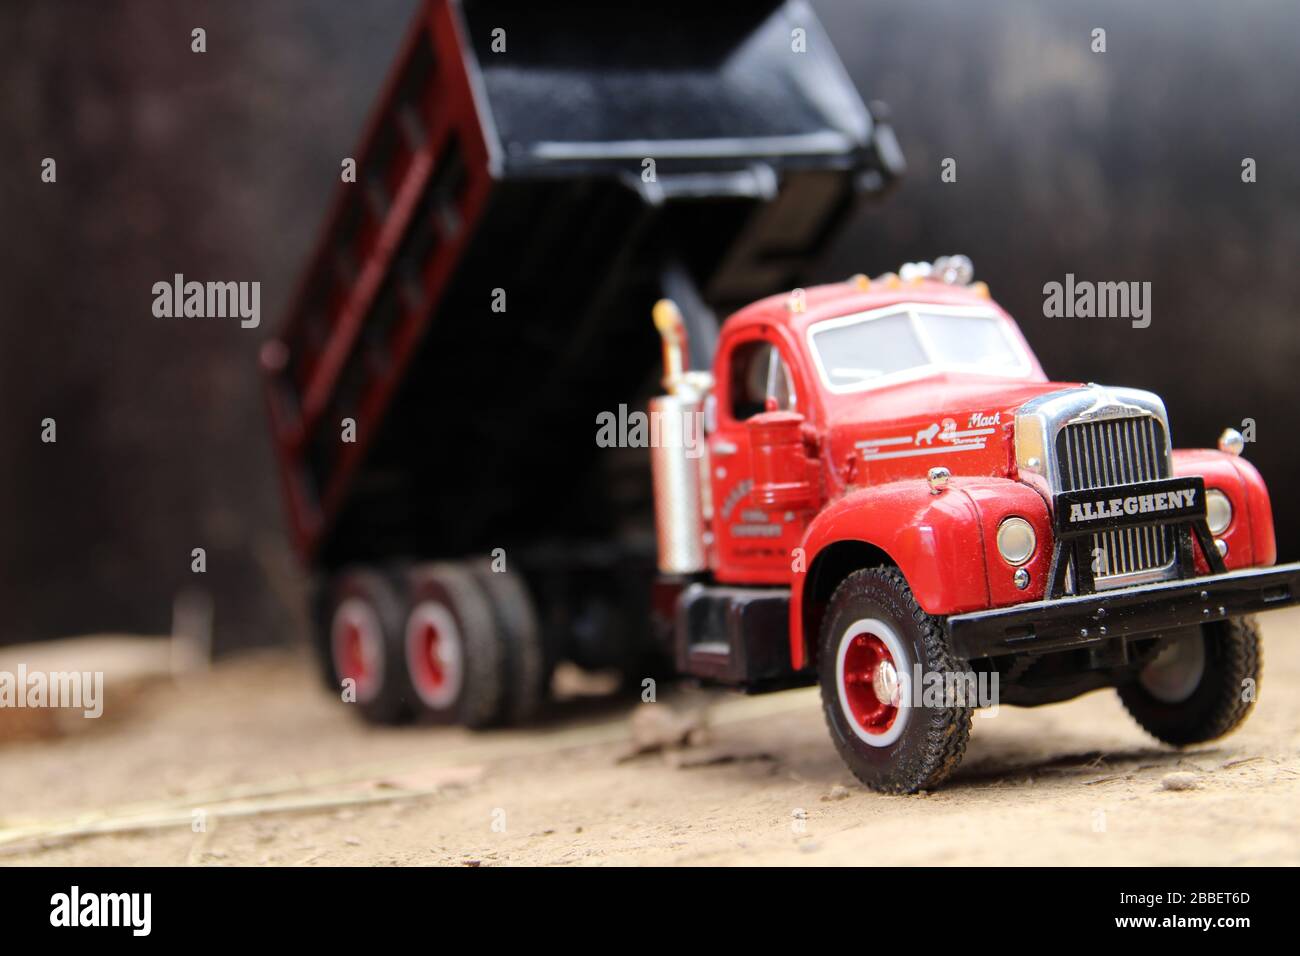 Toy dump truck in the dirt with bed raised Stock Photo